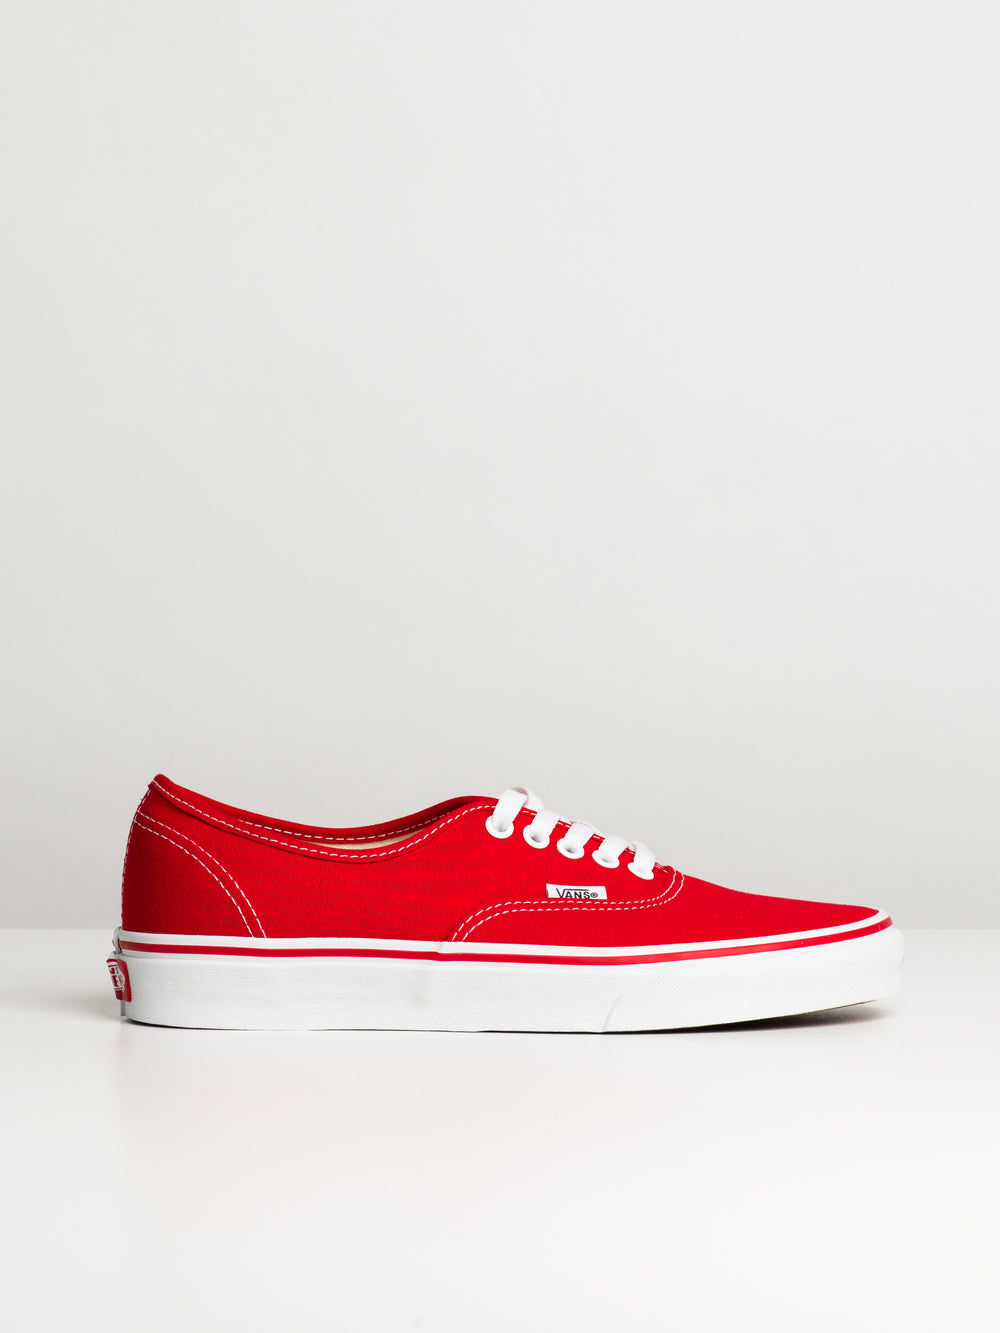 MENS VANS AUTHENTIC RED CANVAS SHOES - CLEARANCE Boathouse Collective